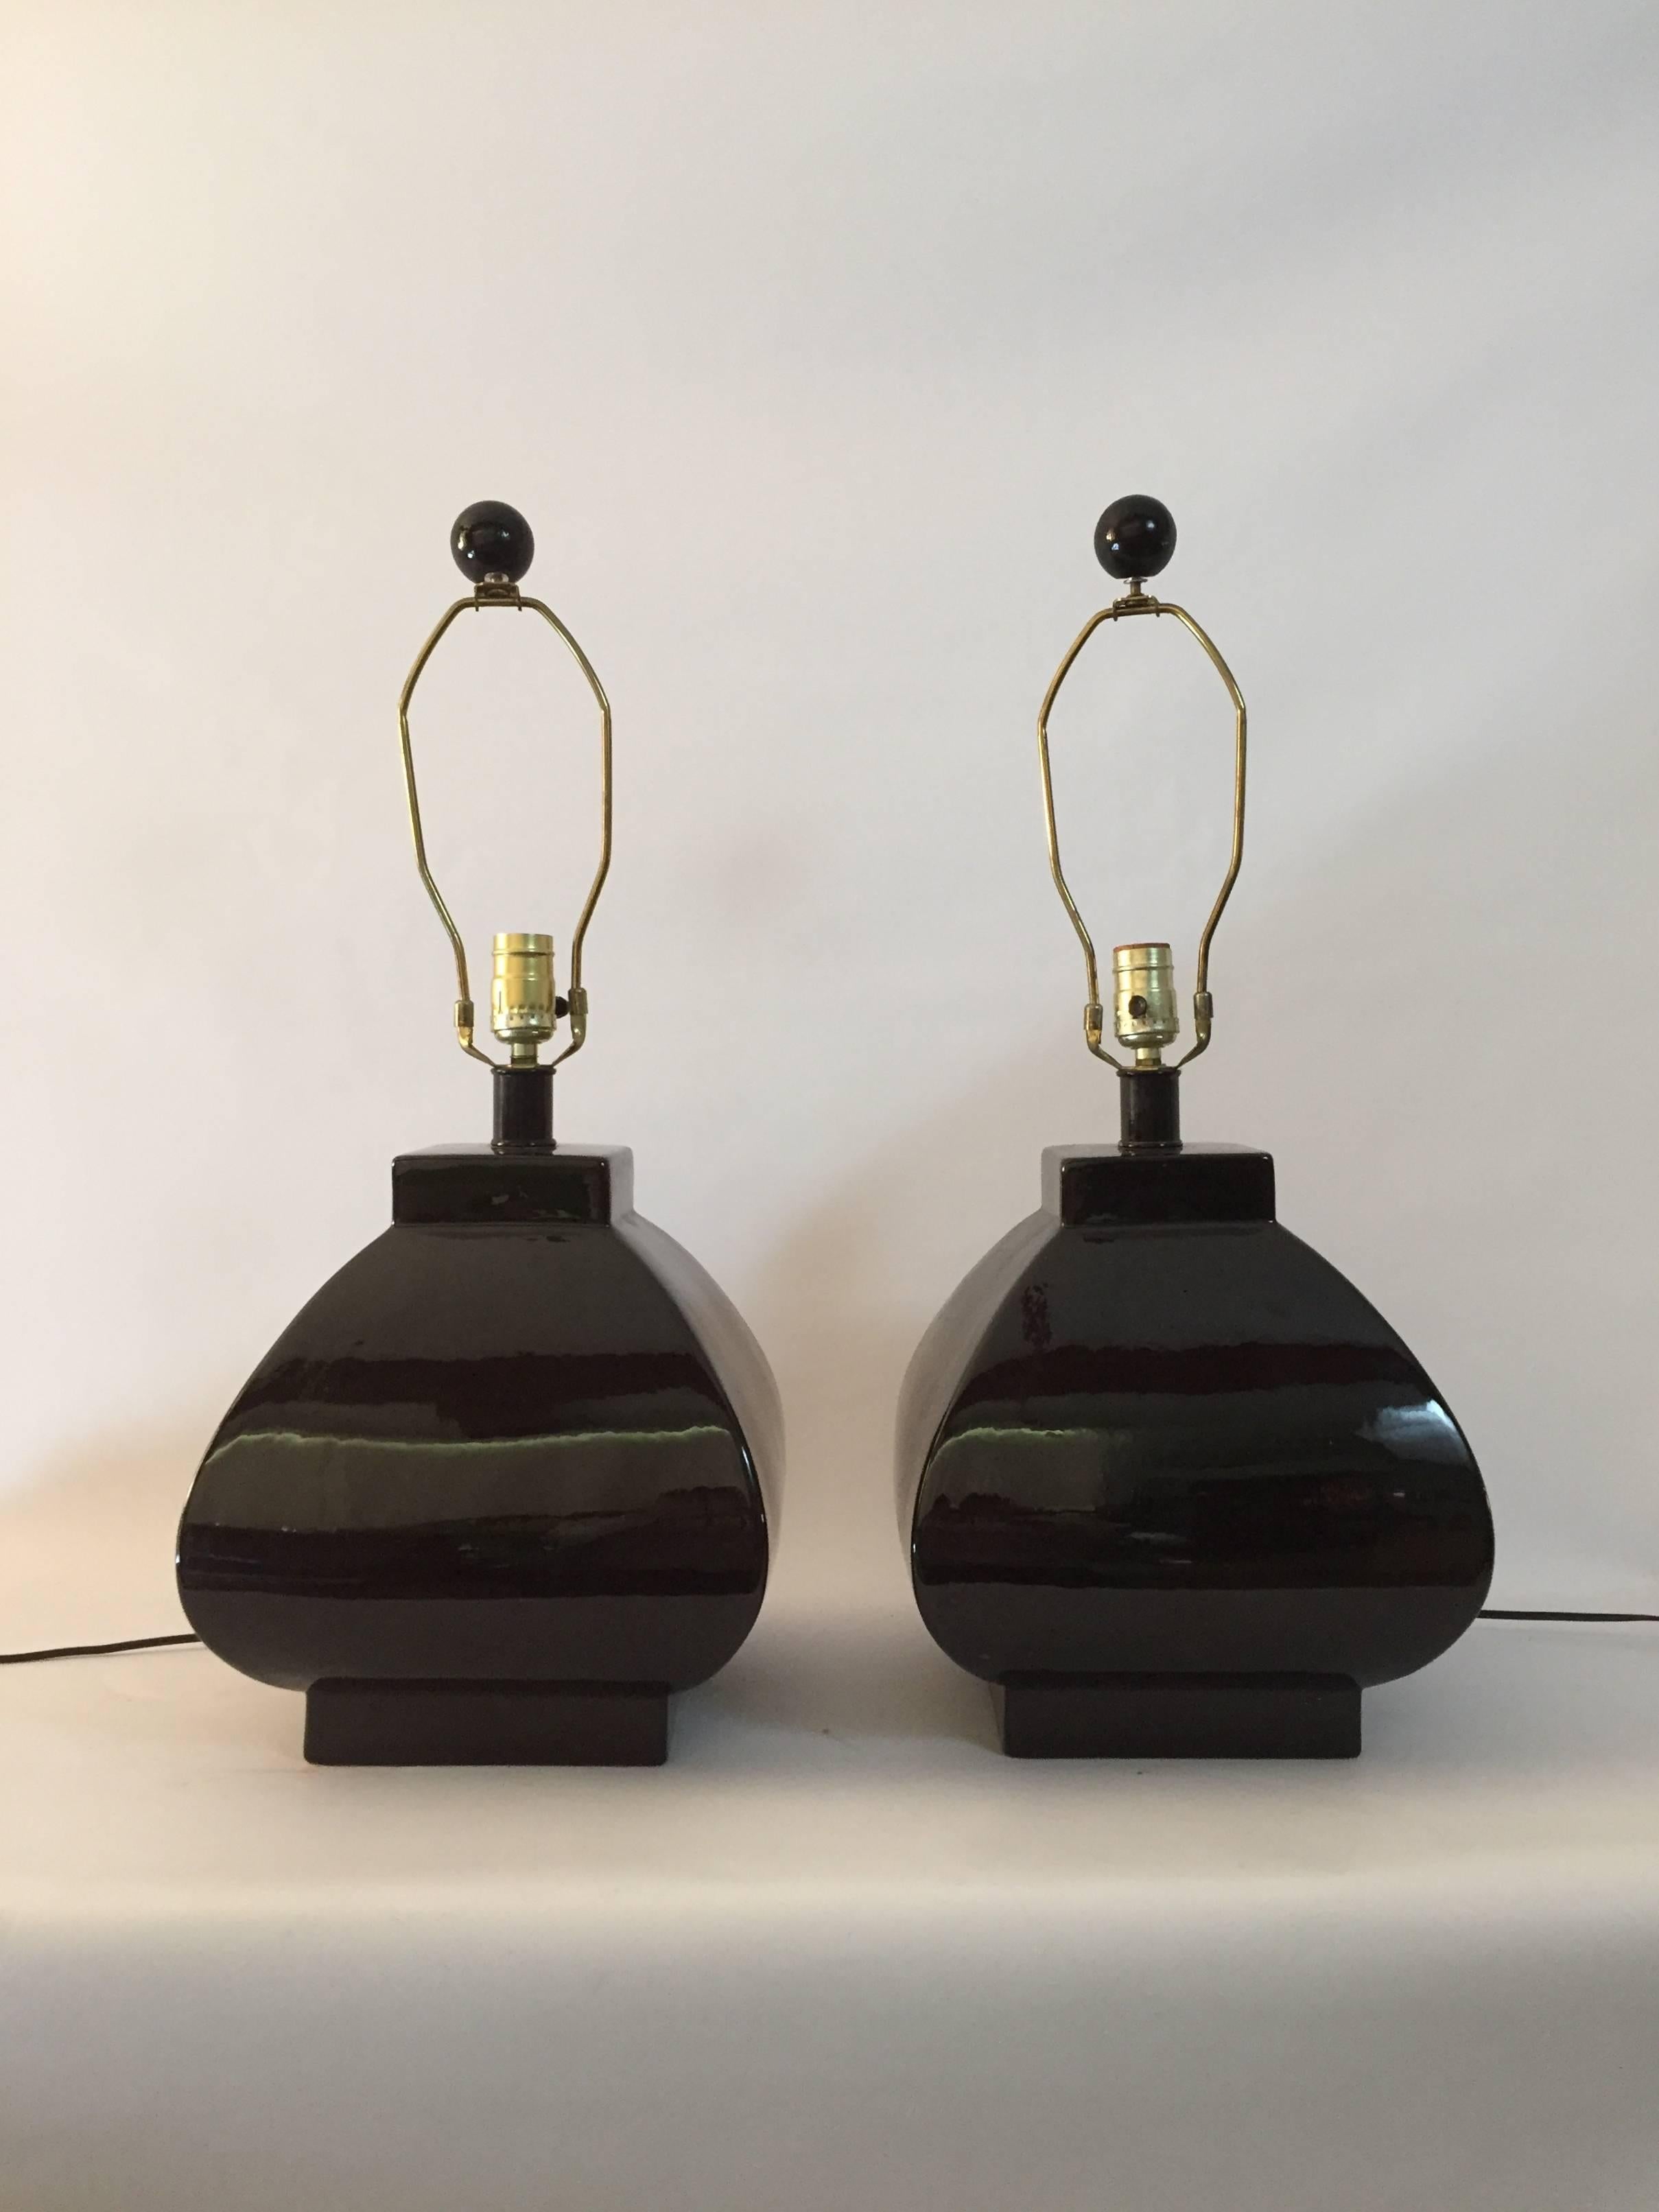 Beautiful pair of Postmodern high gloss black glazed lamps. Fully working condition with old wiring, circa 1970-1980. Felted bottoms. Shades for photography only. Shades not included.

Overall height from base to finial is 26